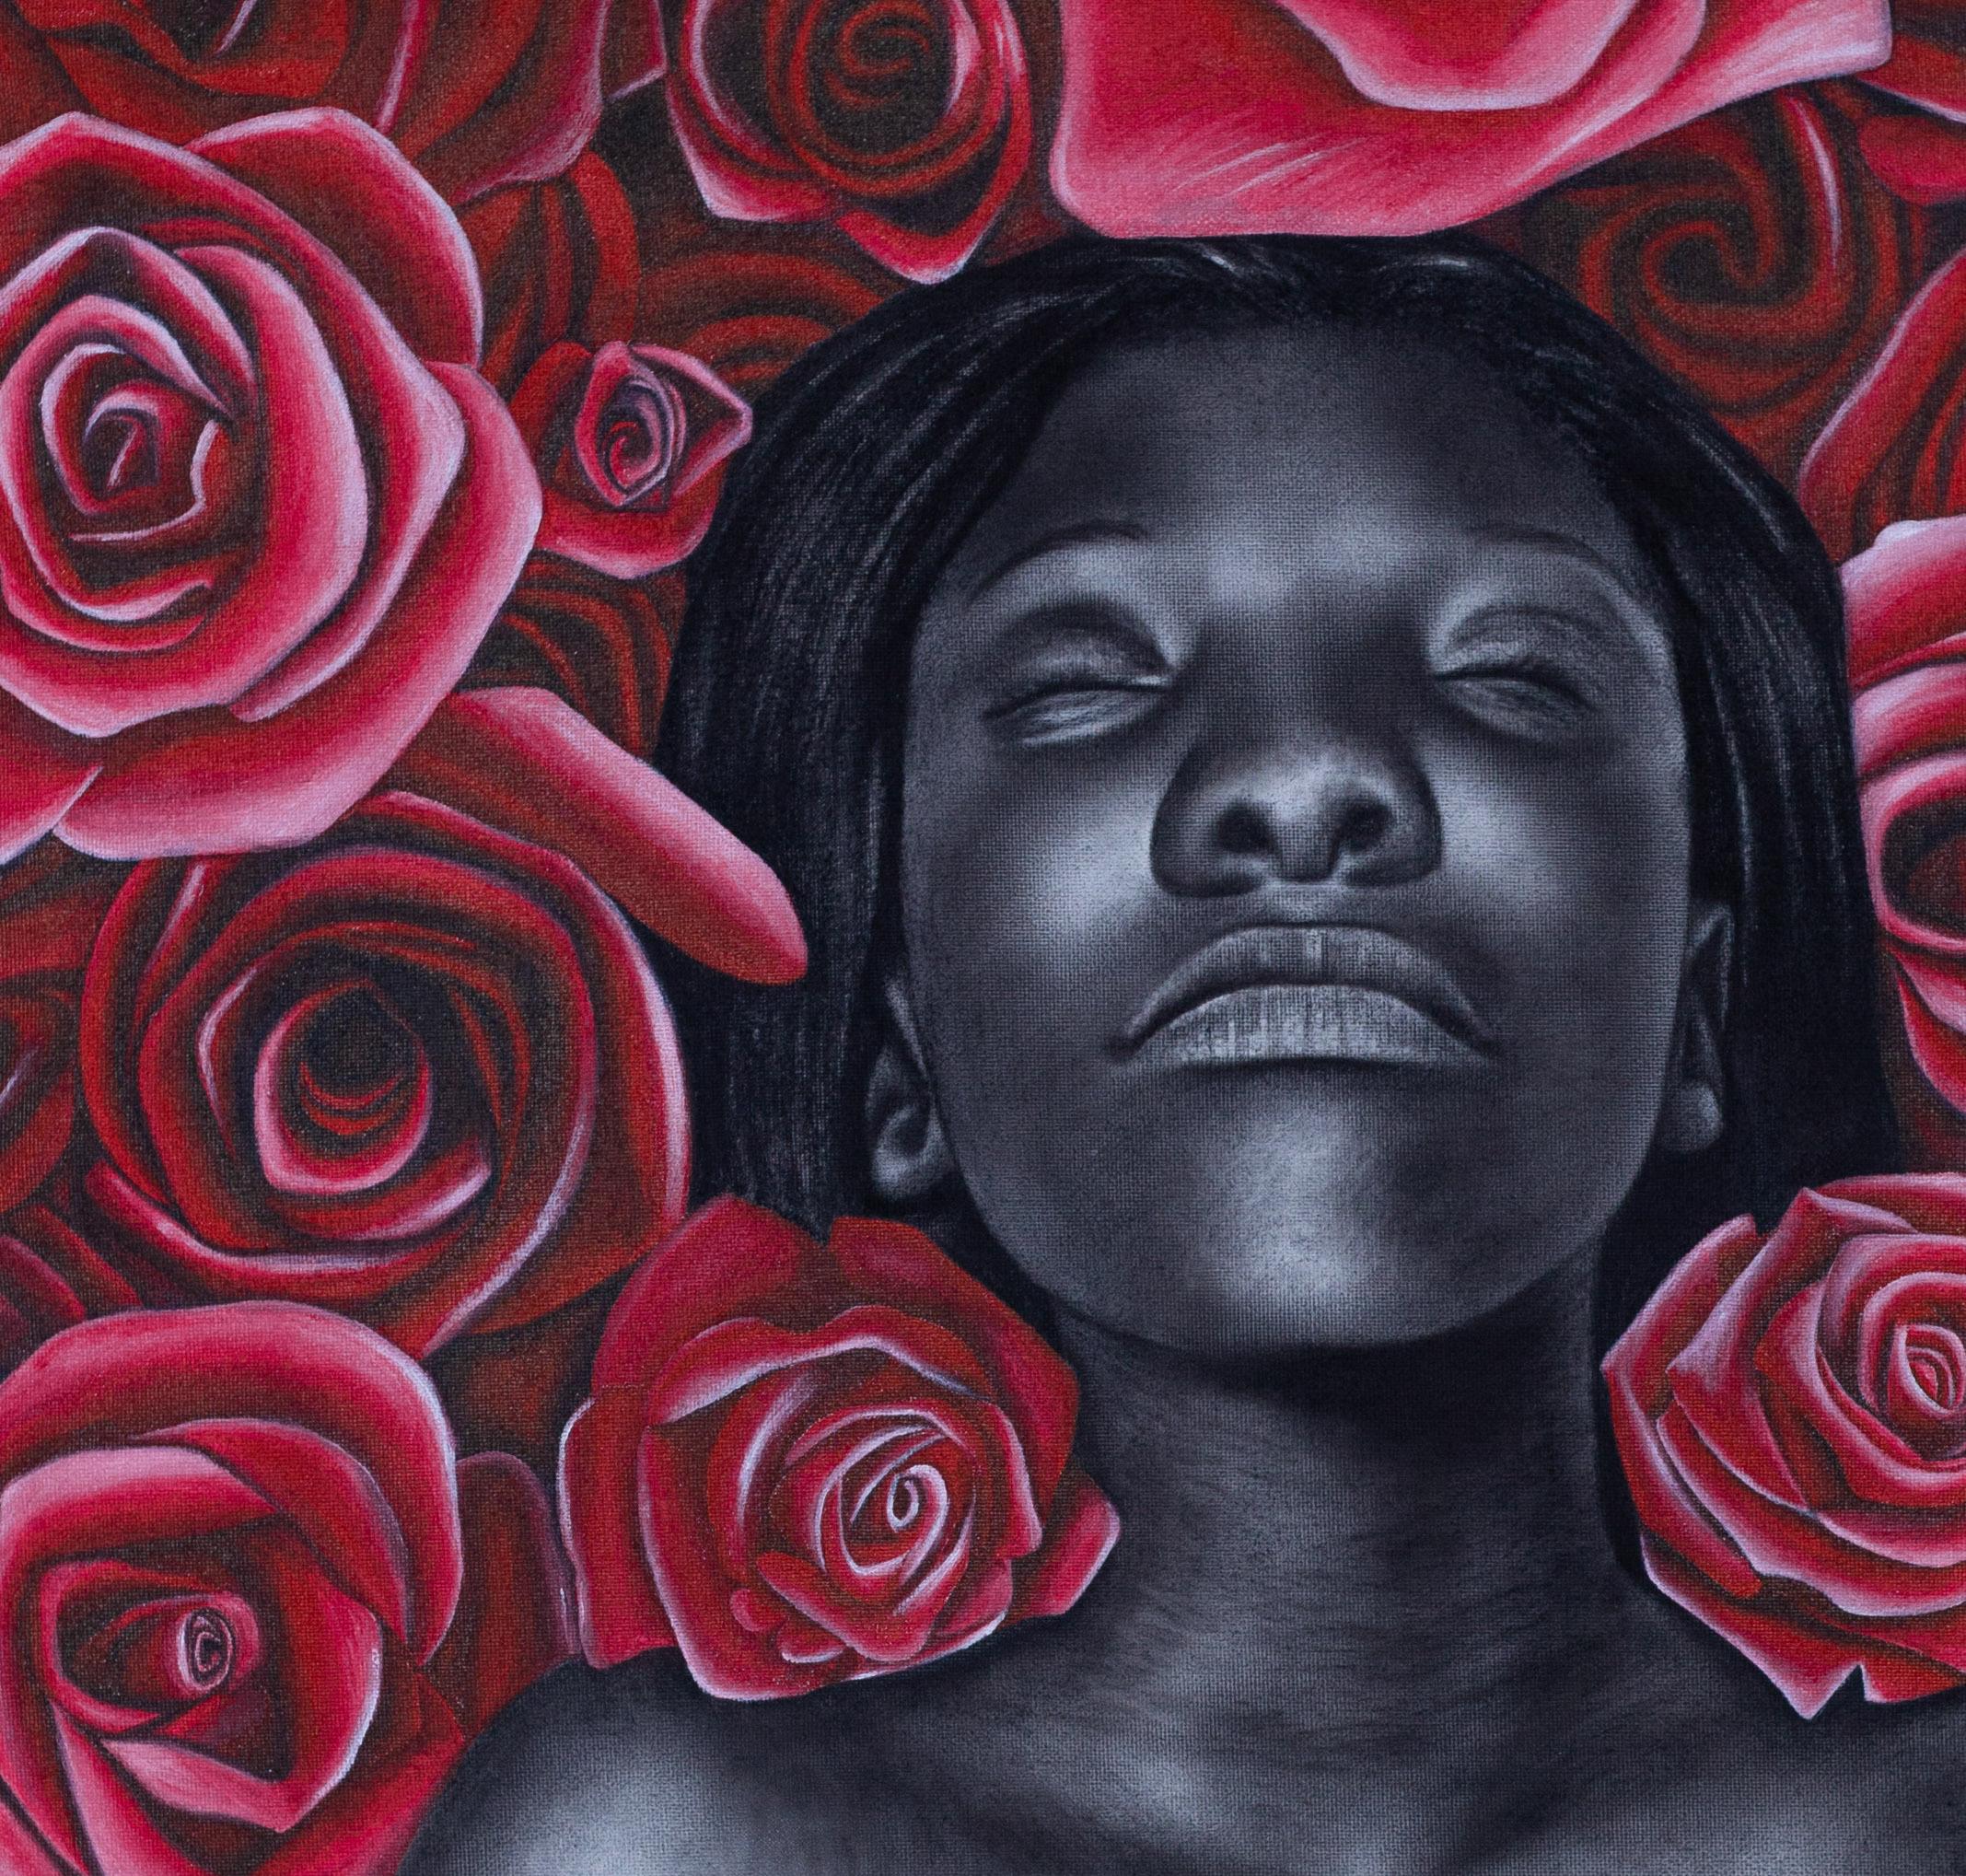 Bed of Roses - Painting by Damilola Olusegun